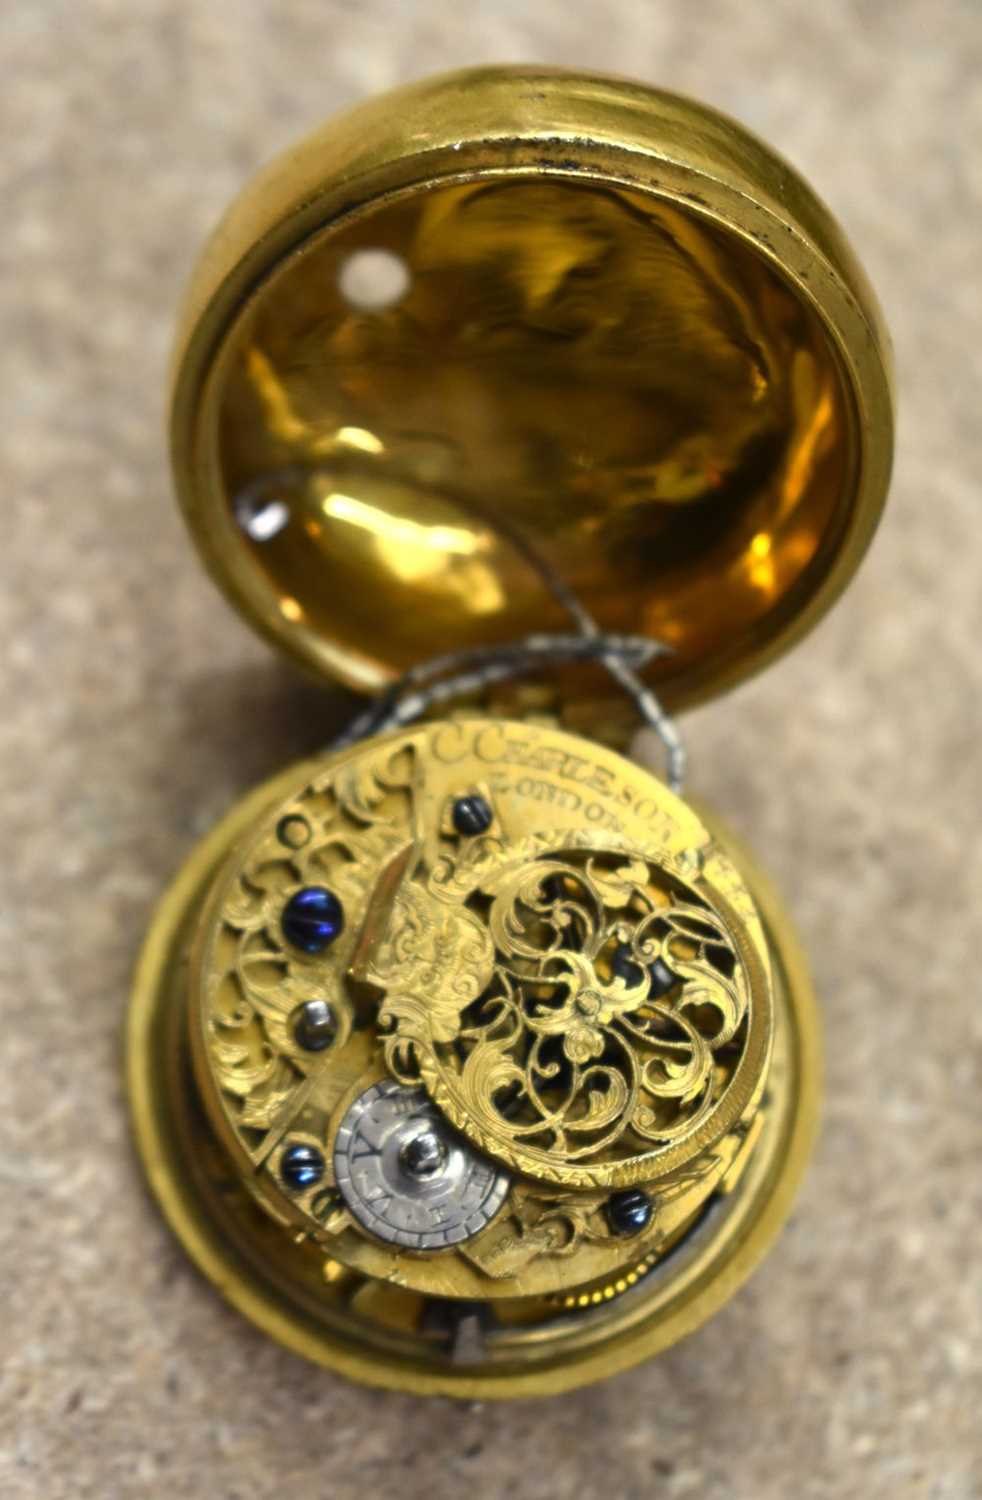 Gents pair case, verge/fusee, key wound and set, open face pocket watch, made by C. Charleson, - Image 4 of 7